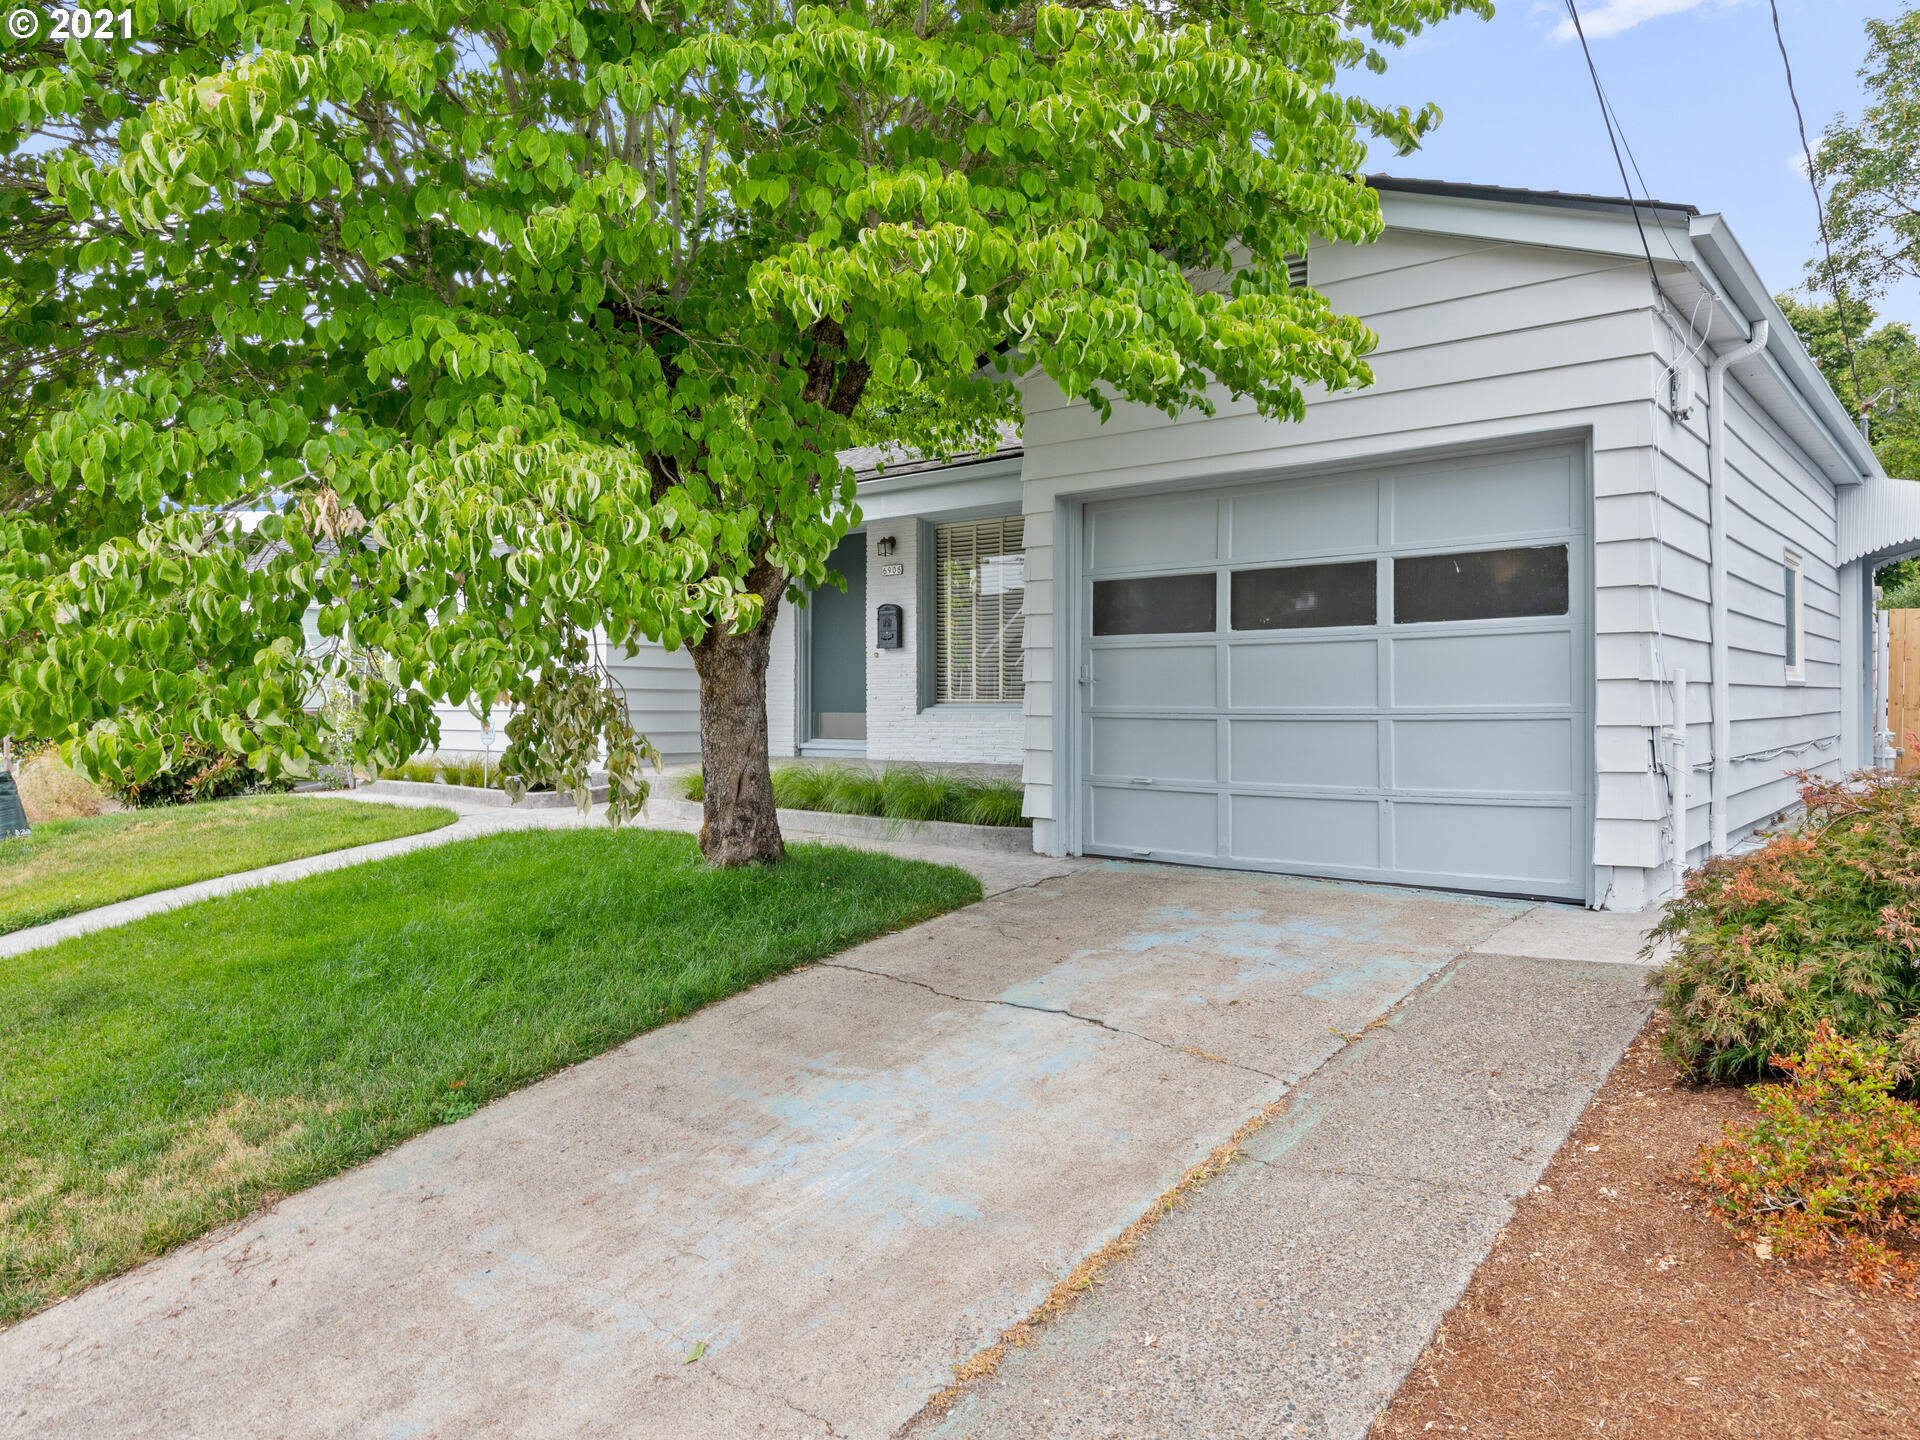 6906 N GREELEY AVE (1 of 32)